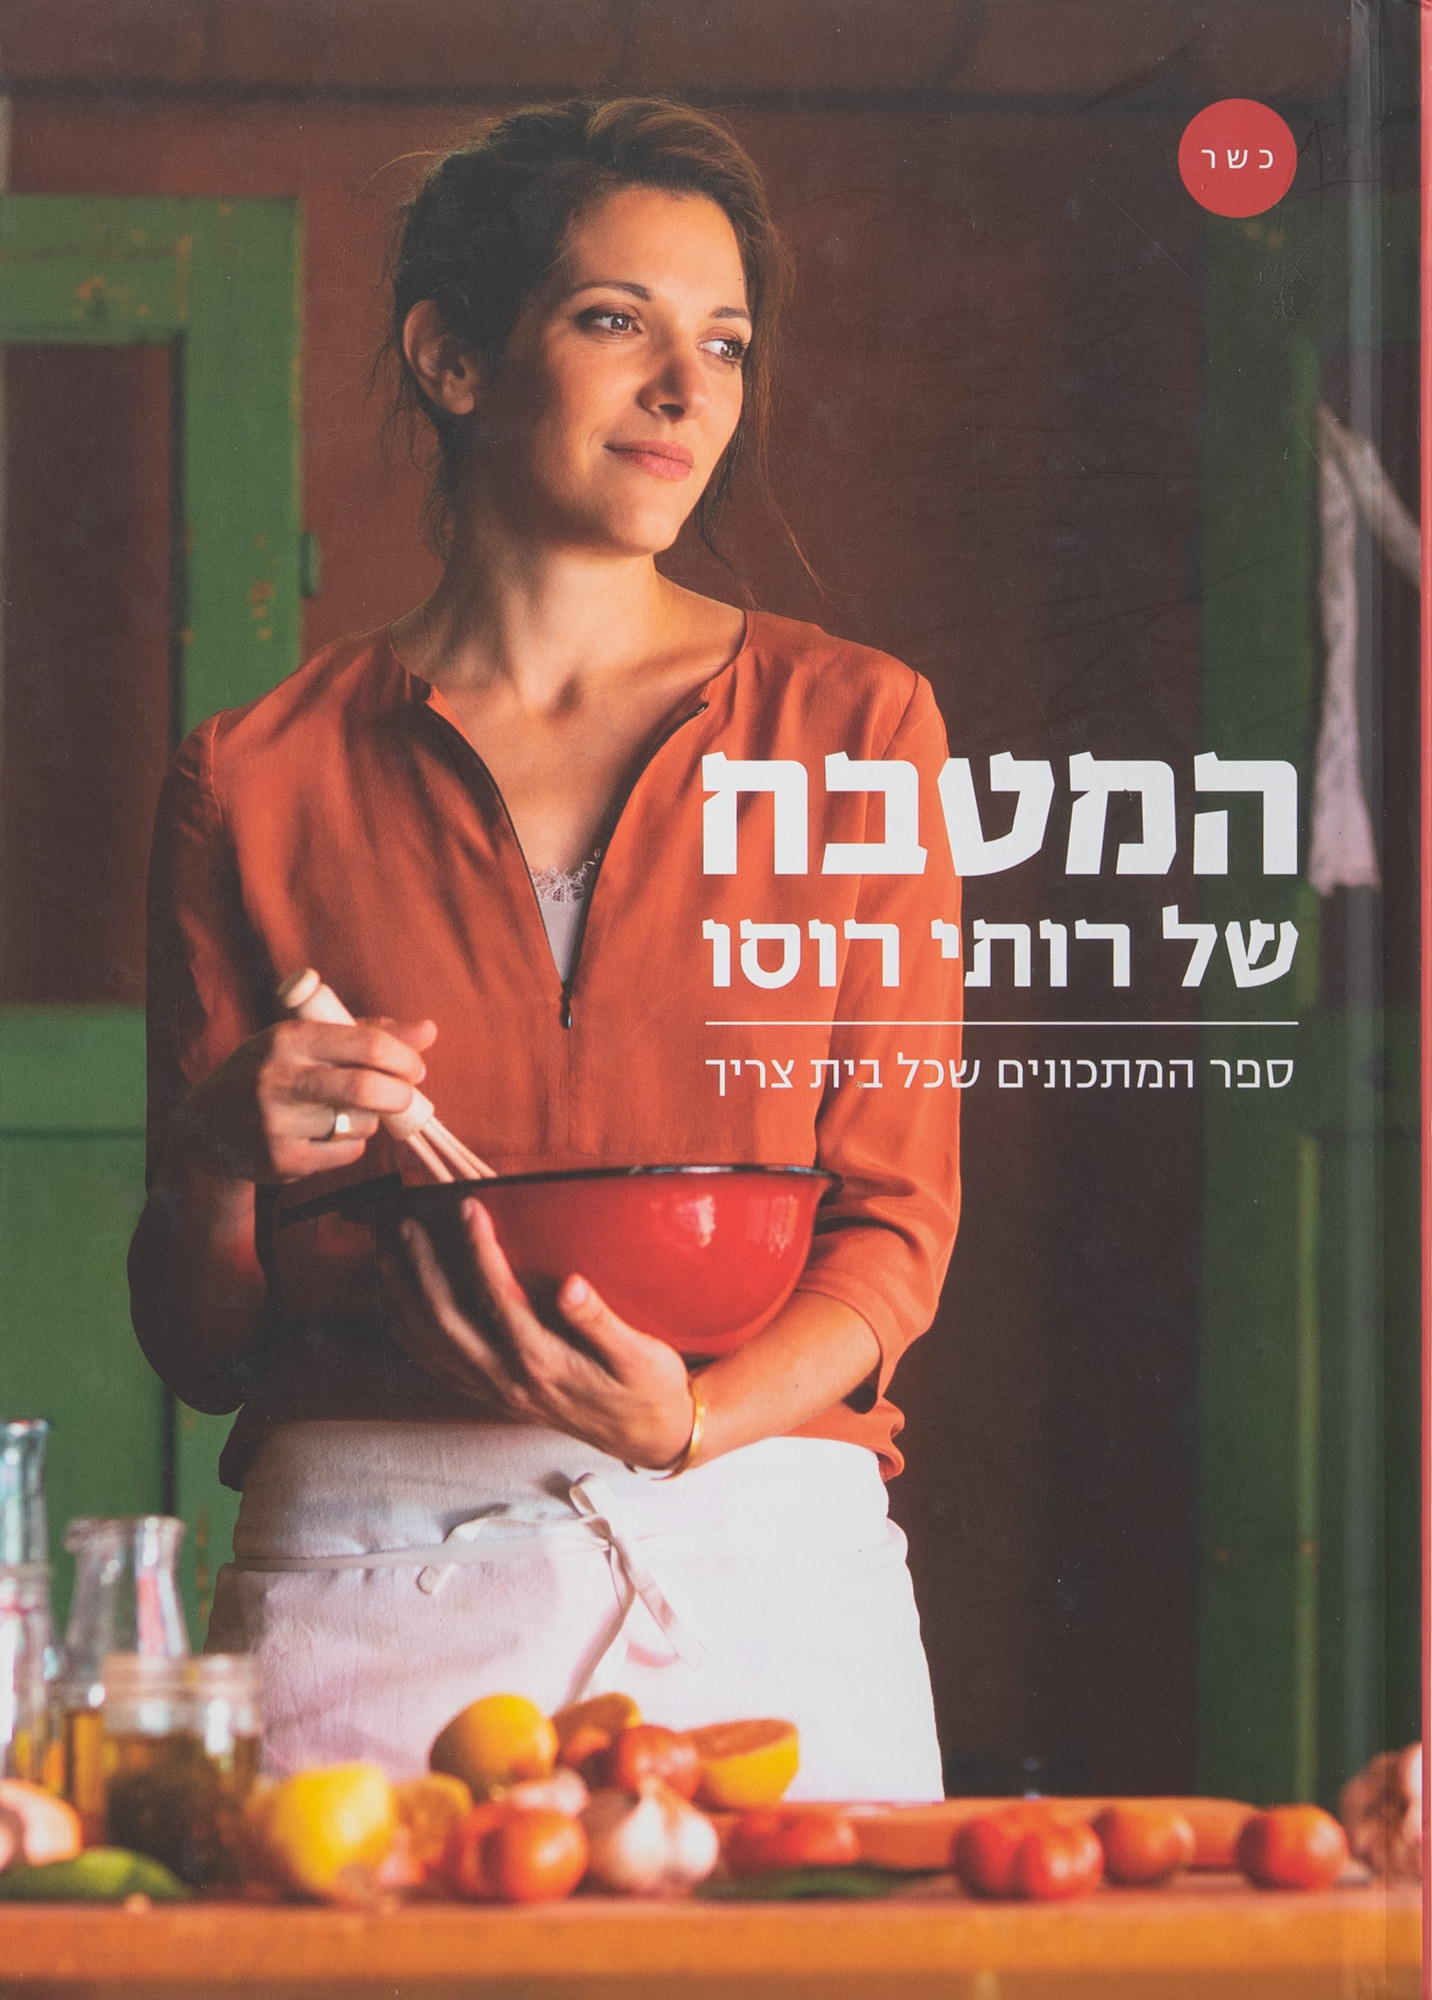 The cover of the Israeli cookbook Hamitbach shel Ruthie Rousso